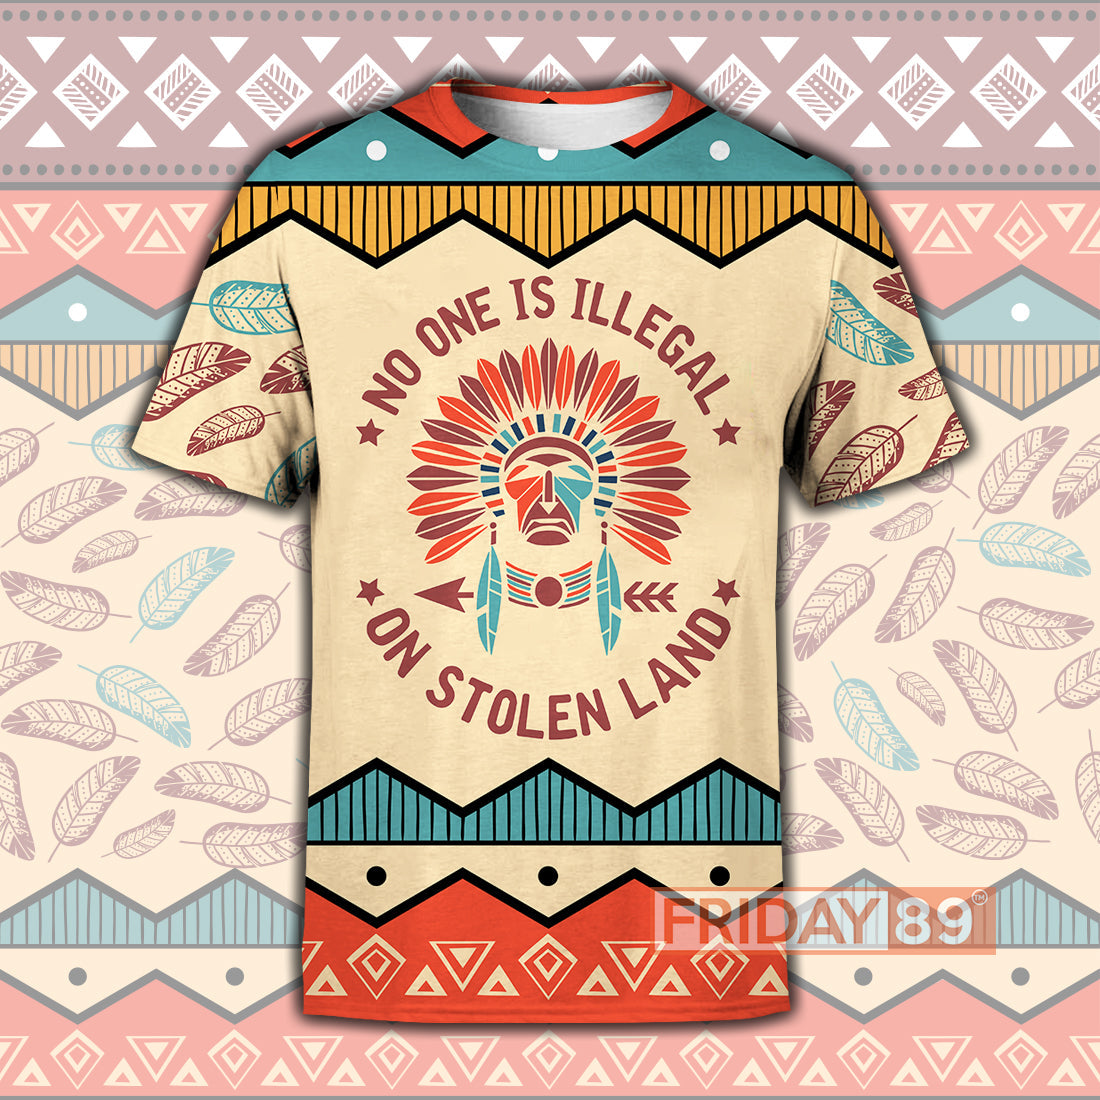 Unifinz Native American Hoodie Native American Culture No One Is Illegal On Stolen Land 3D Print T-shirt Cool Native American Shirt Sweater Tank 2025